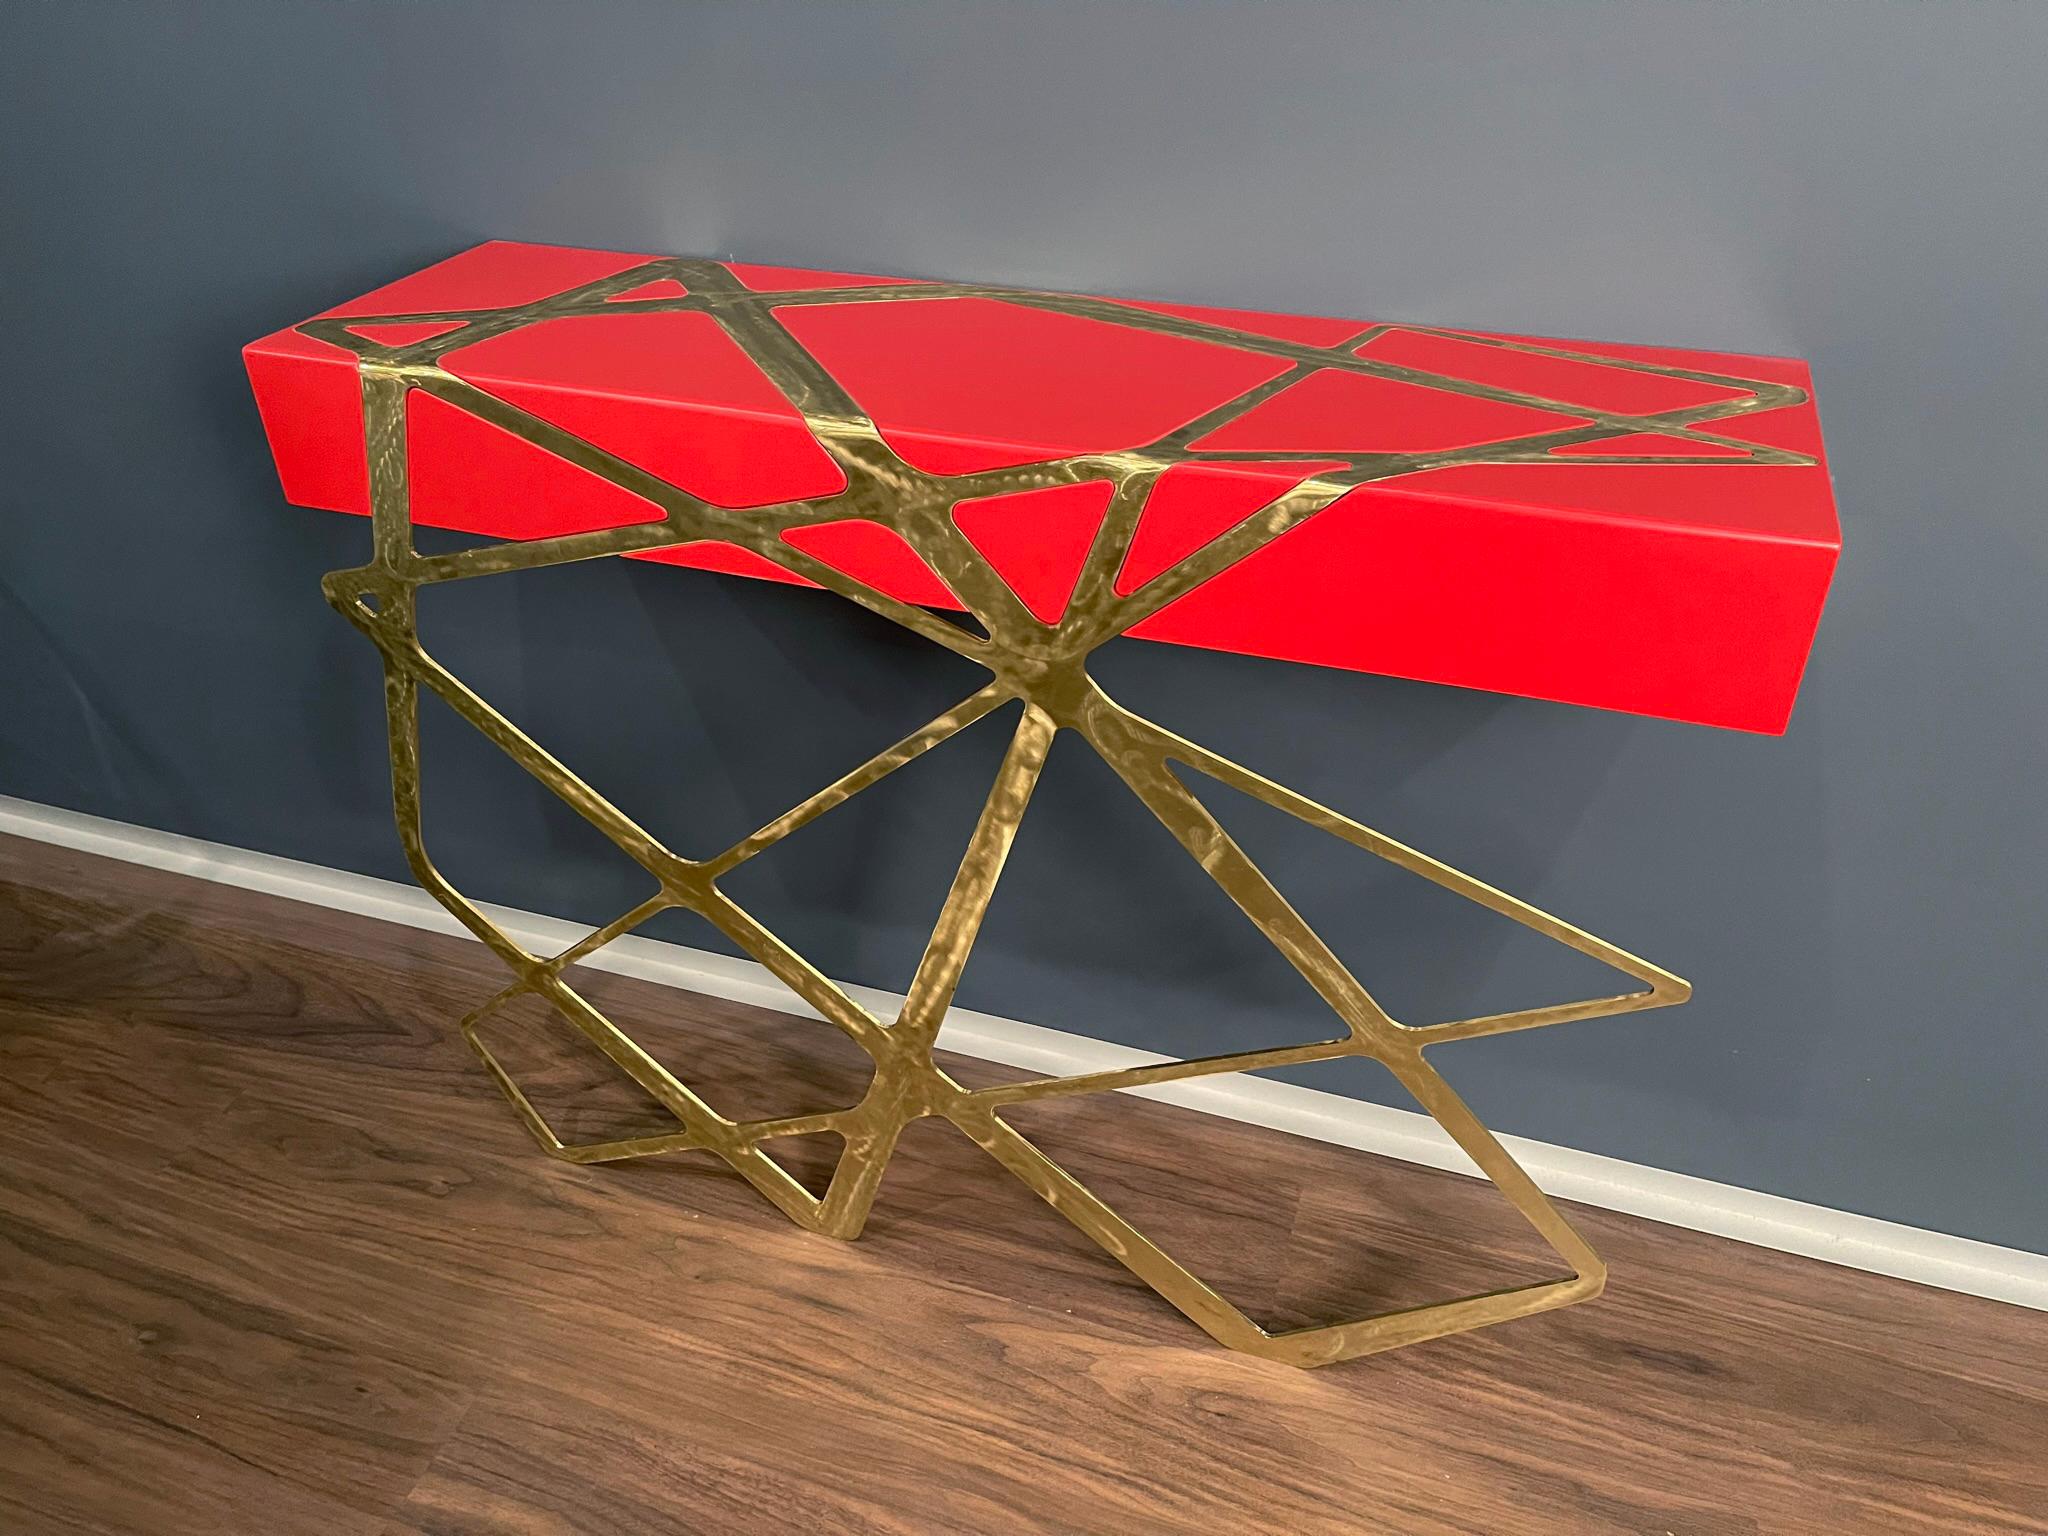 Hand-Crafted 21st Century Modern Console Table in Red Lacquer and Brass Showroom Sample